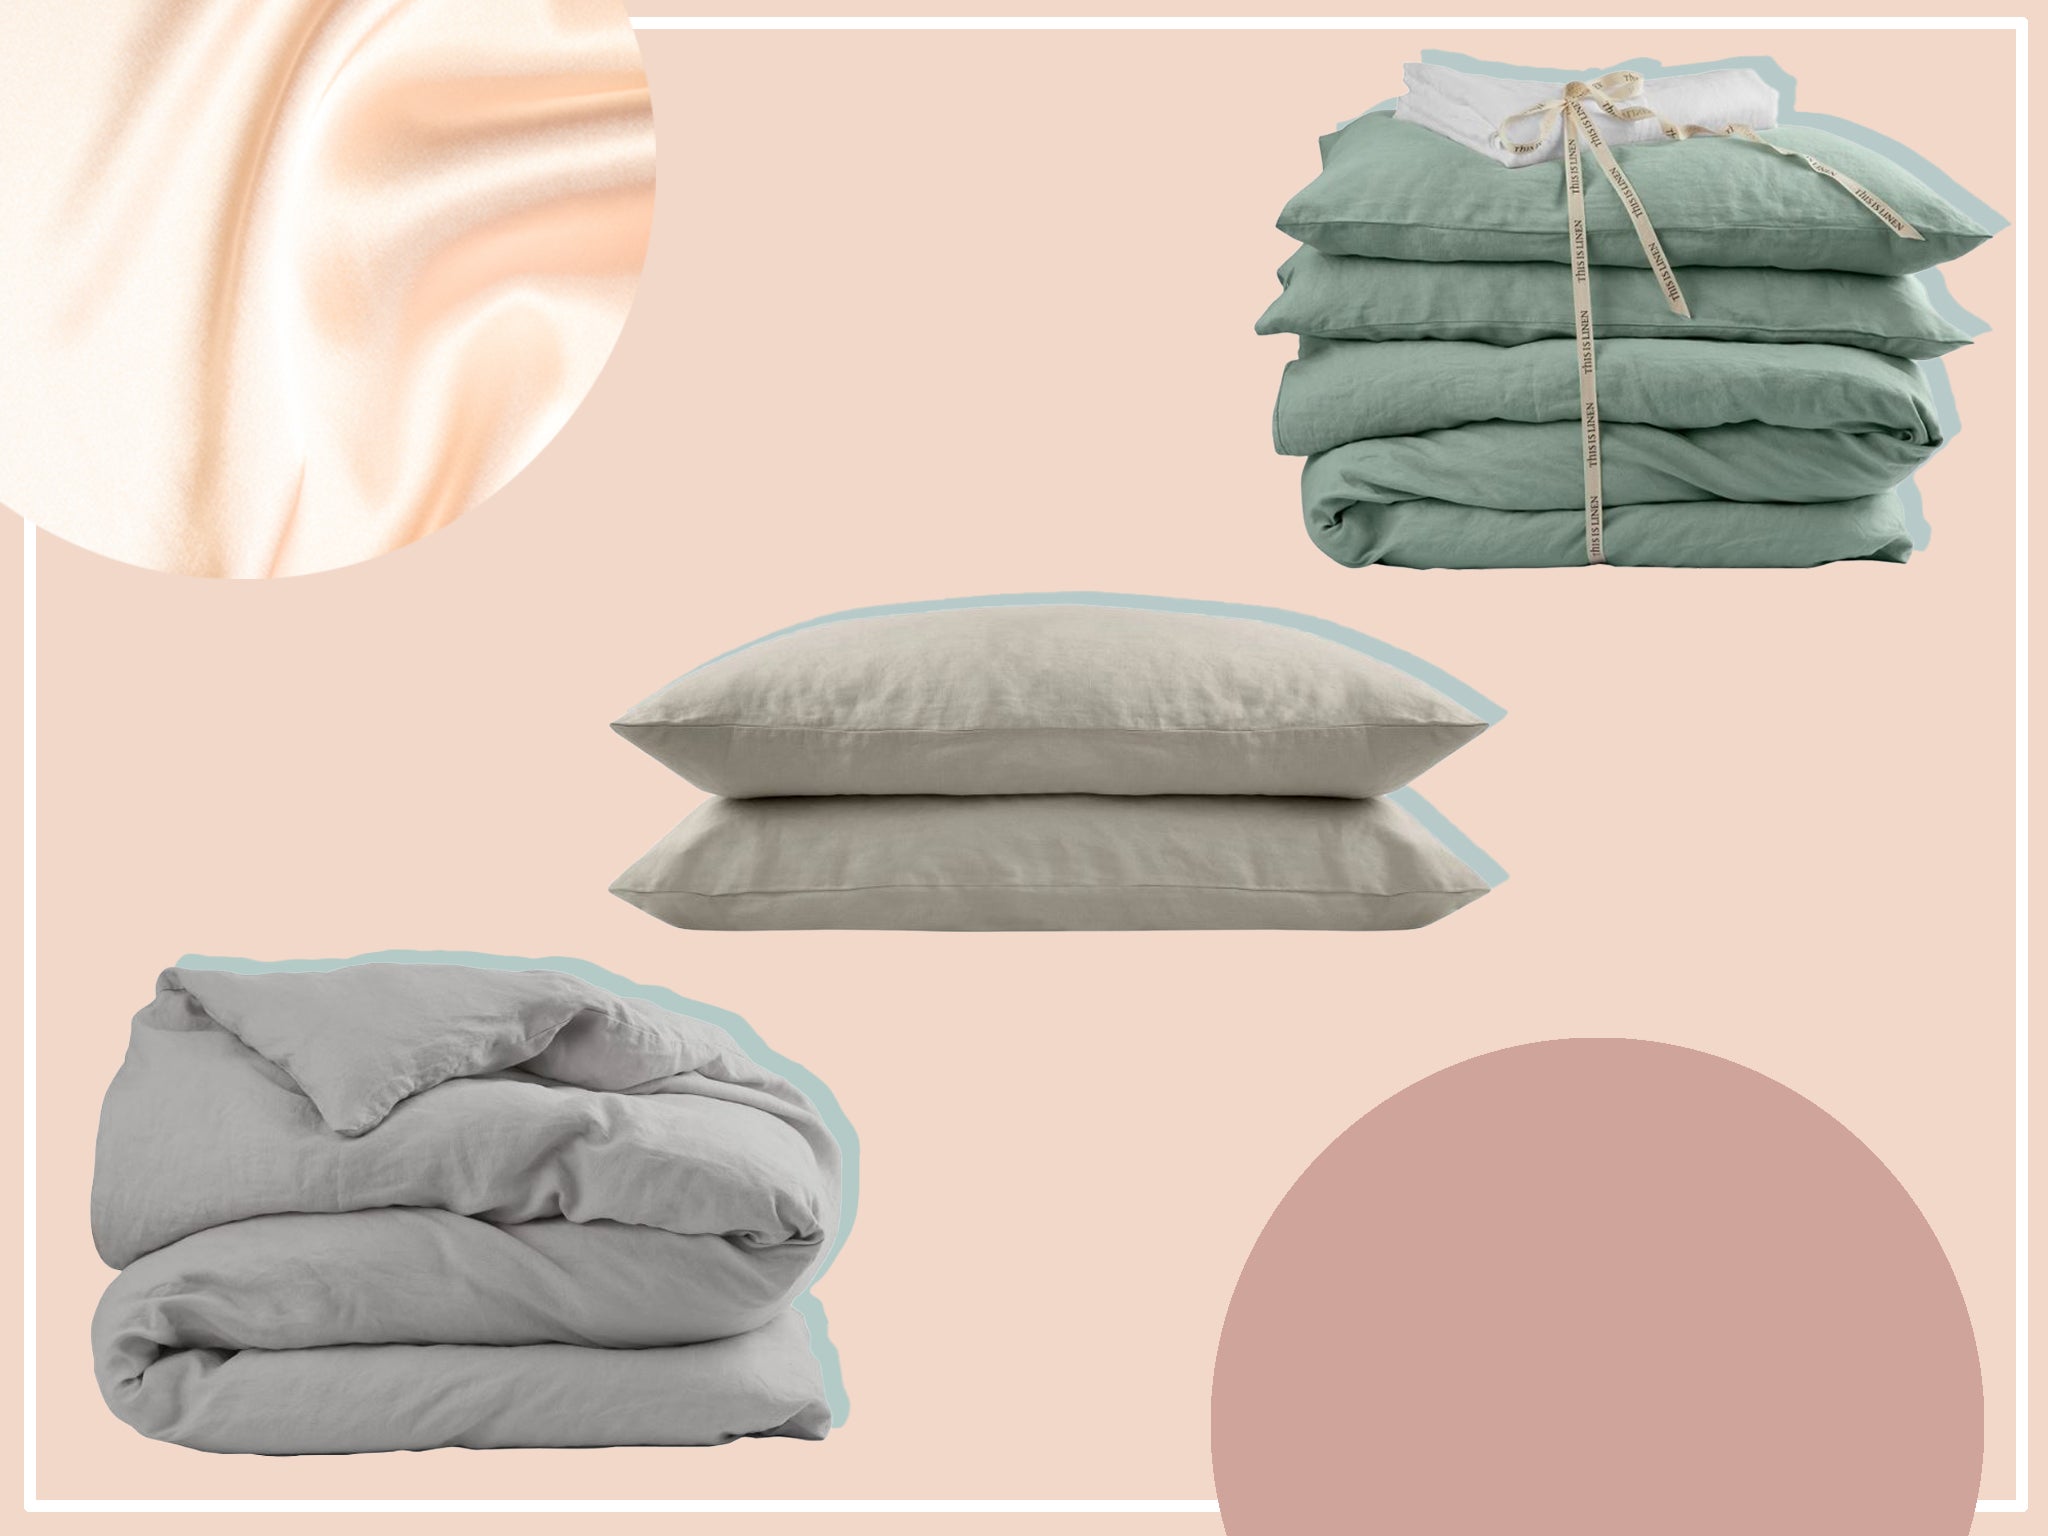 Pillowcases, duvet covers, fitted sheets and more are all included in the sale